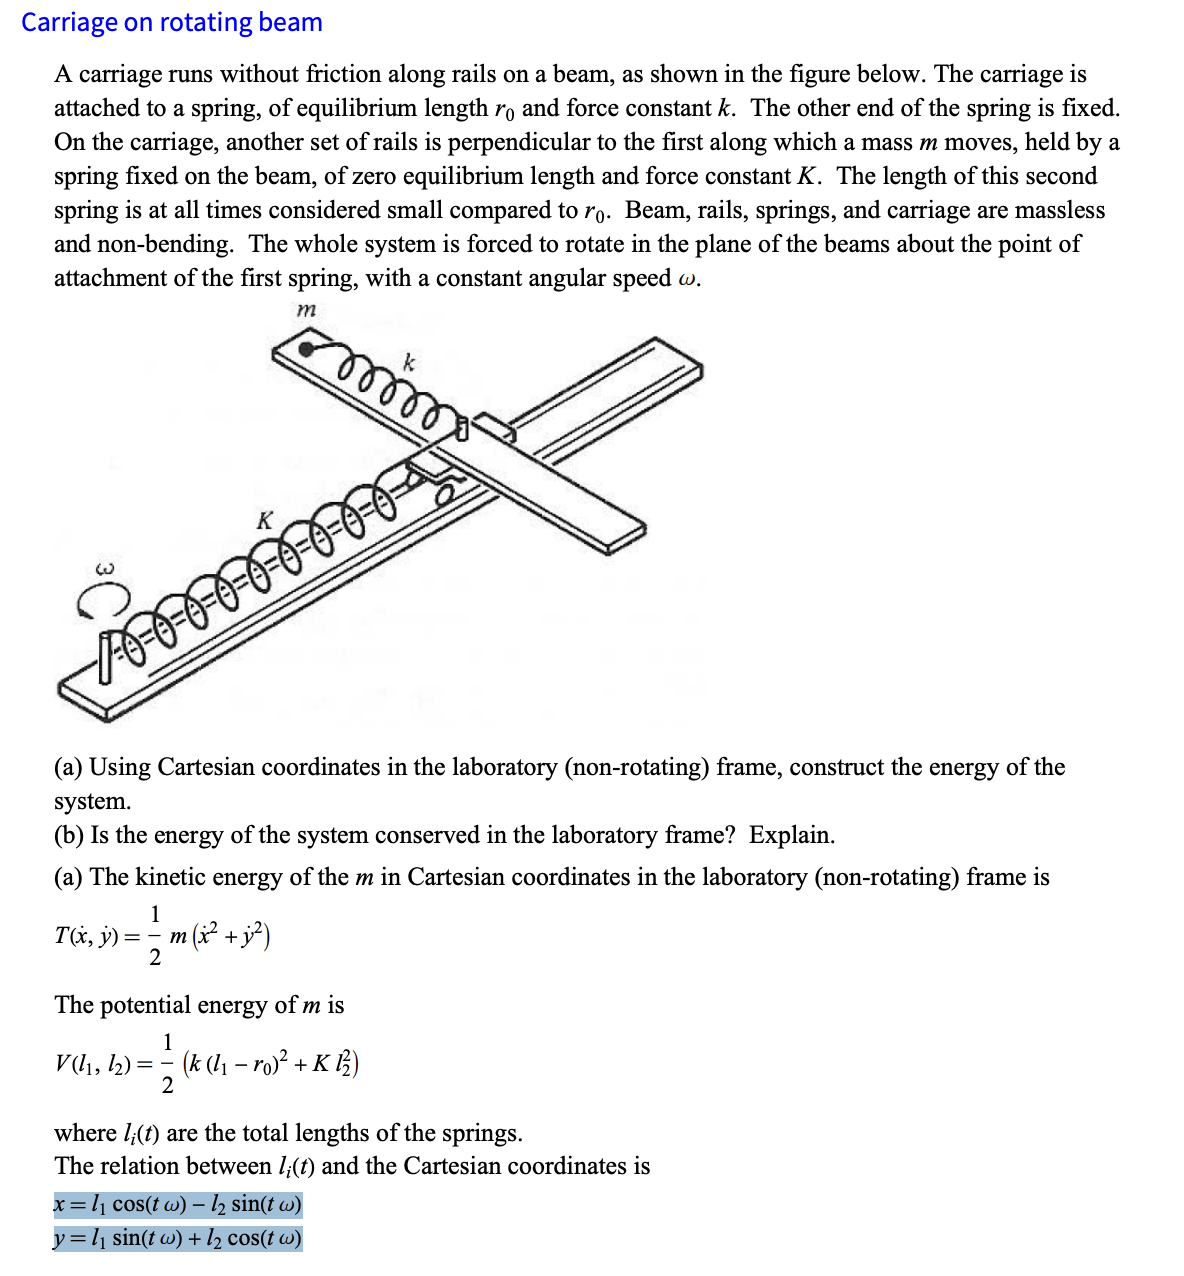 Carriage on rotating beam
A carriage runs without friction along rails on a beam, as shown in the figure below. The carriage is
attached to a spring, of equilibrium length ro and force constant k. The other end of the spring is fixed.
On the carriage, another set of rails is perpendicular to the first along which a mass m moves, held by a
spring fixed on the beam, of zero equilibrium length and force constant K. The length of this second
spring is at all times considered small compared to ro. Beam, rails, springs, and carriage are massless
and non-bending. The whole system is forced to rotate in the plane of the beams about the point of
attachment of the first spring, with a constant angular speed w.
m
1000
k
(a) Using Cartesian coordinates in the laboratory (non-rotating) frame, construct the energy of the
system.
(b) Is the energy of the system conserved in the laboratory frame? Explain.
(a) The kinetic energy of the m in Cartesian coordinates in the laboratory (non-rotating) frame is
1
T(x, y) == m (x² + j;³²)
2
The potential energy of m is
1
V (11, 12)== (k (l₁ - ro)² + K 12)
2
where (t) are the total lengths of the springs.
The relation between 1;(t) and the Cartesian coordinates is
x = l₁ cos(t w) – ½ sin(t w)
-
y = l₁ sin(t w) + l½₂ cos(t w)